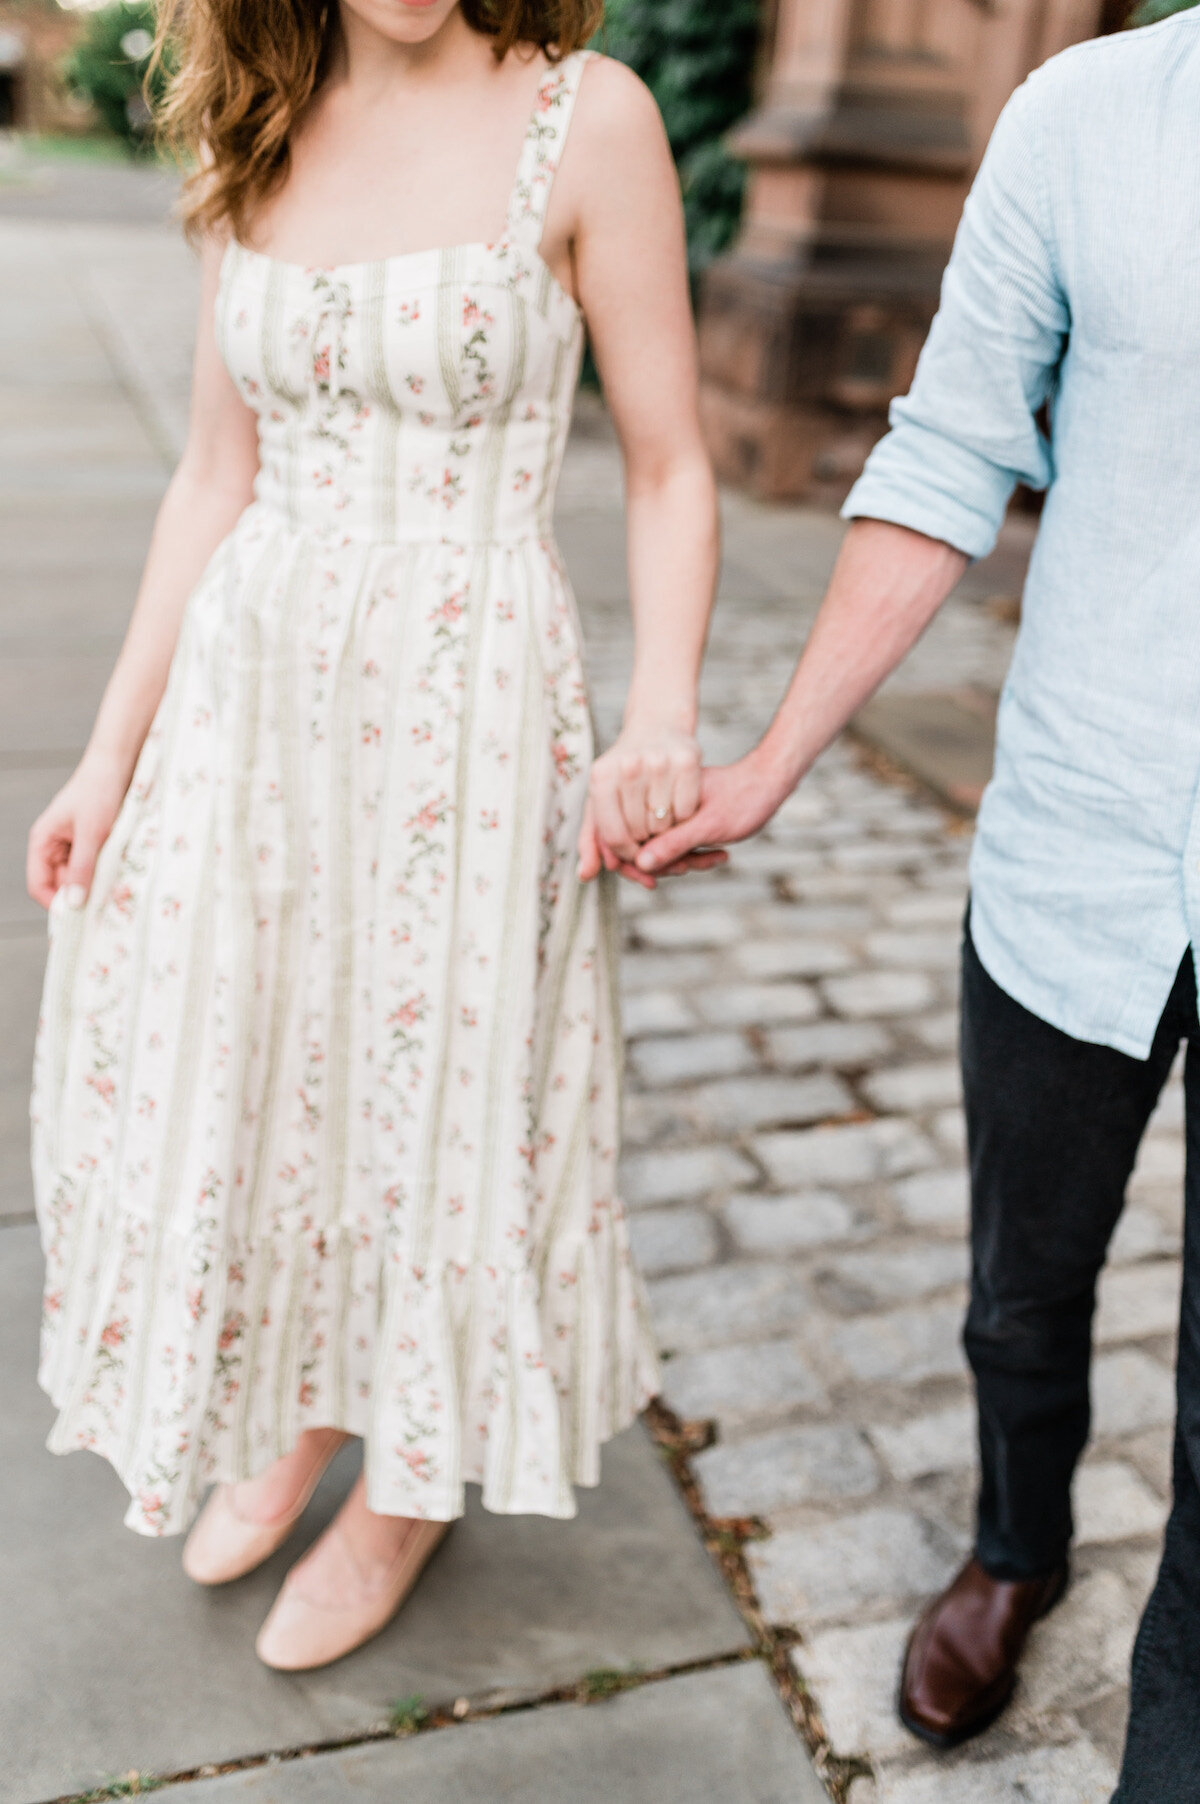 Crafting moments that read like editorial spreads, our luxury engagement sessions in Princeton are a blend of romance and artistry. Experience your love story through an editorial perspective.